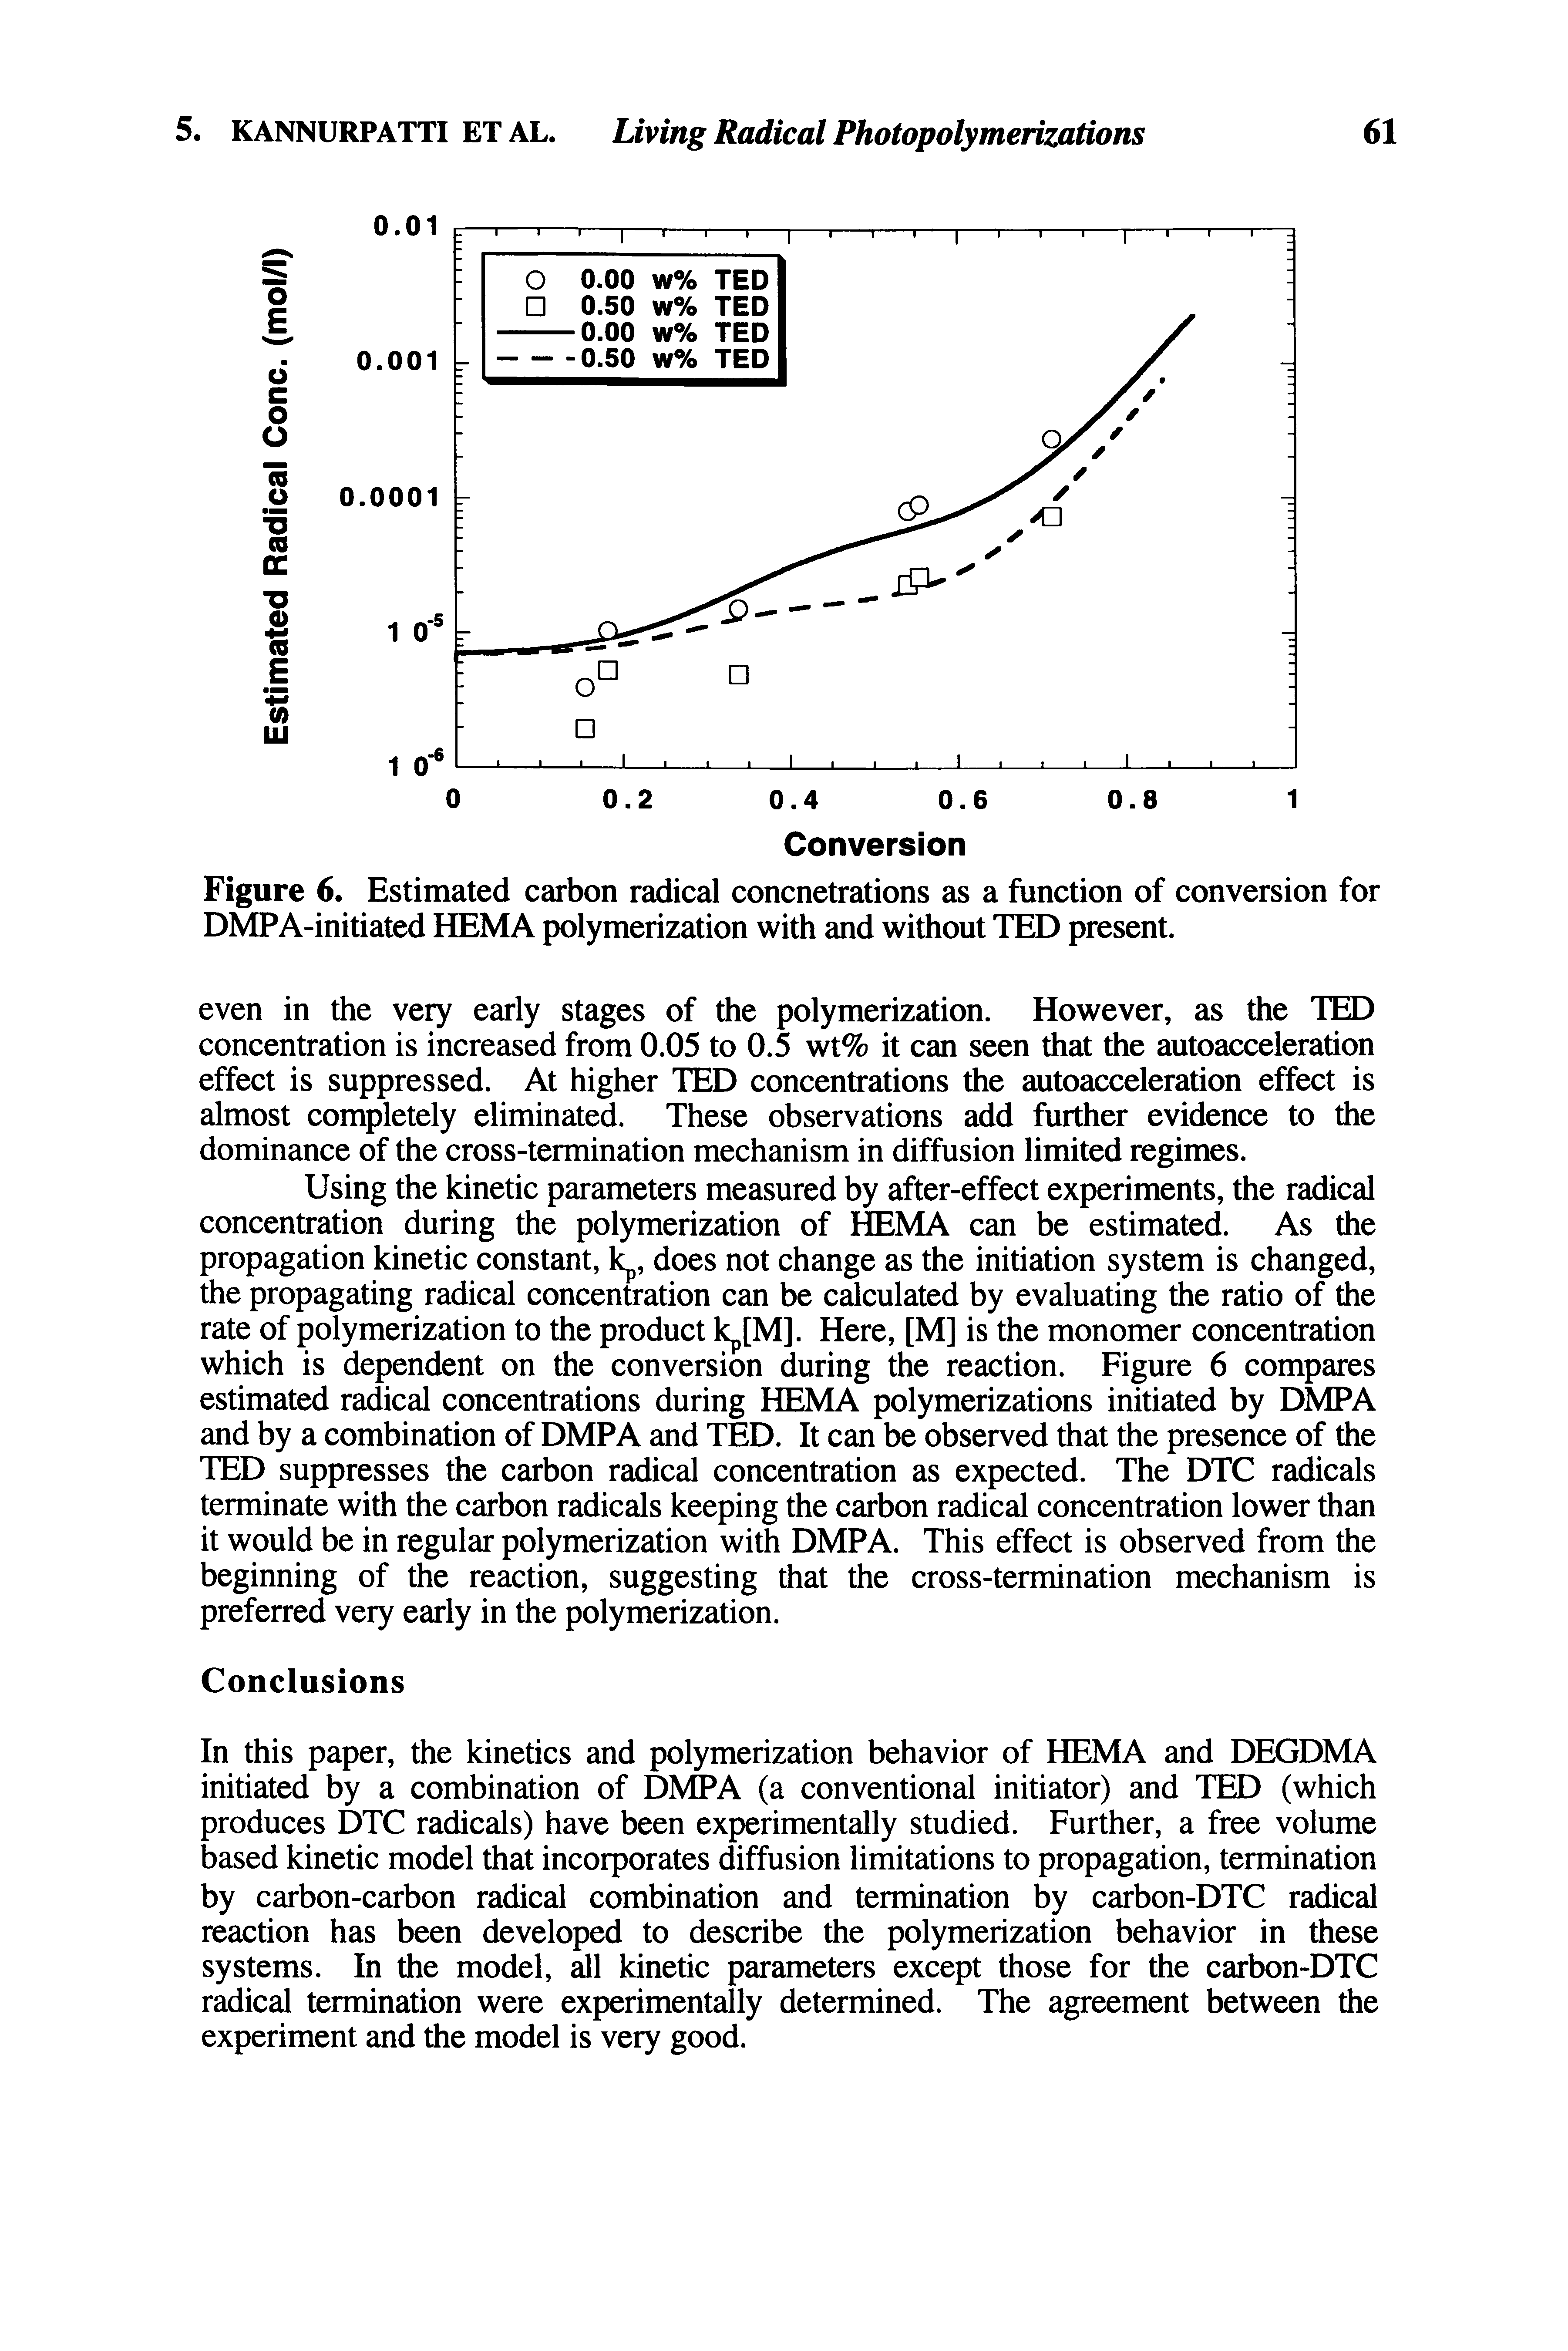 Figure 6. Estimated carbon radical concnetrations as a function of conversion for DMPA-initiated HEMA polymerization with and without TED present.